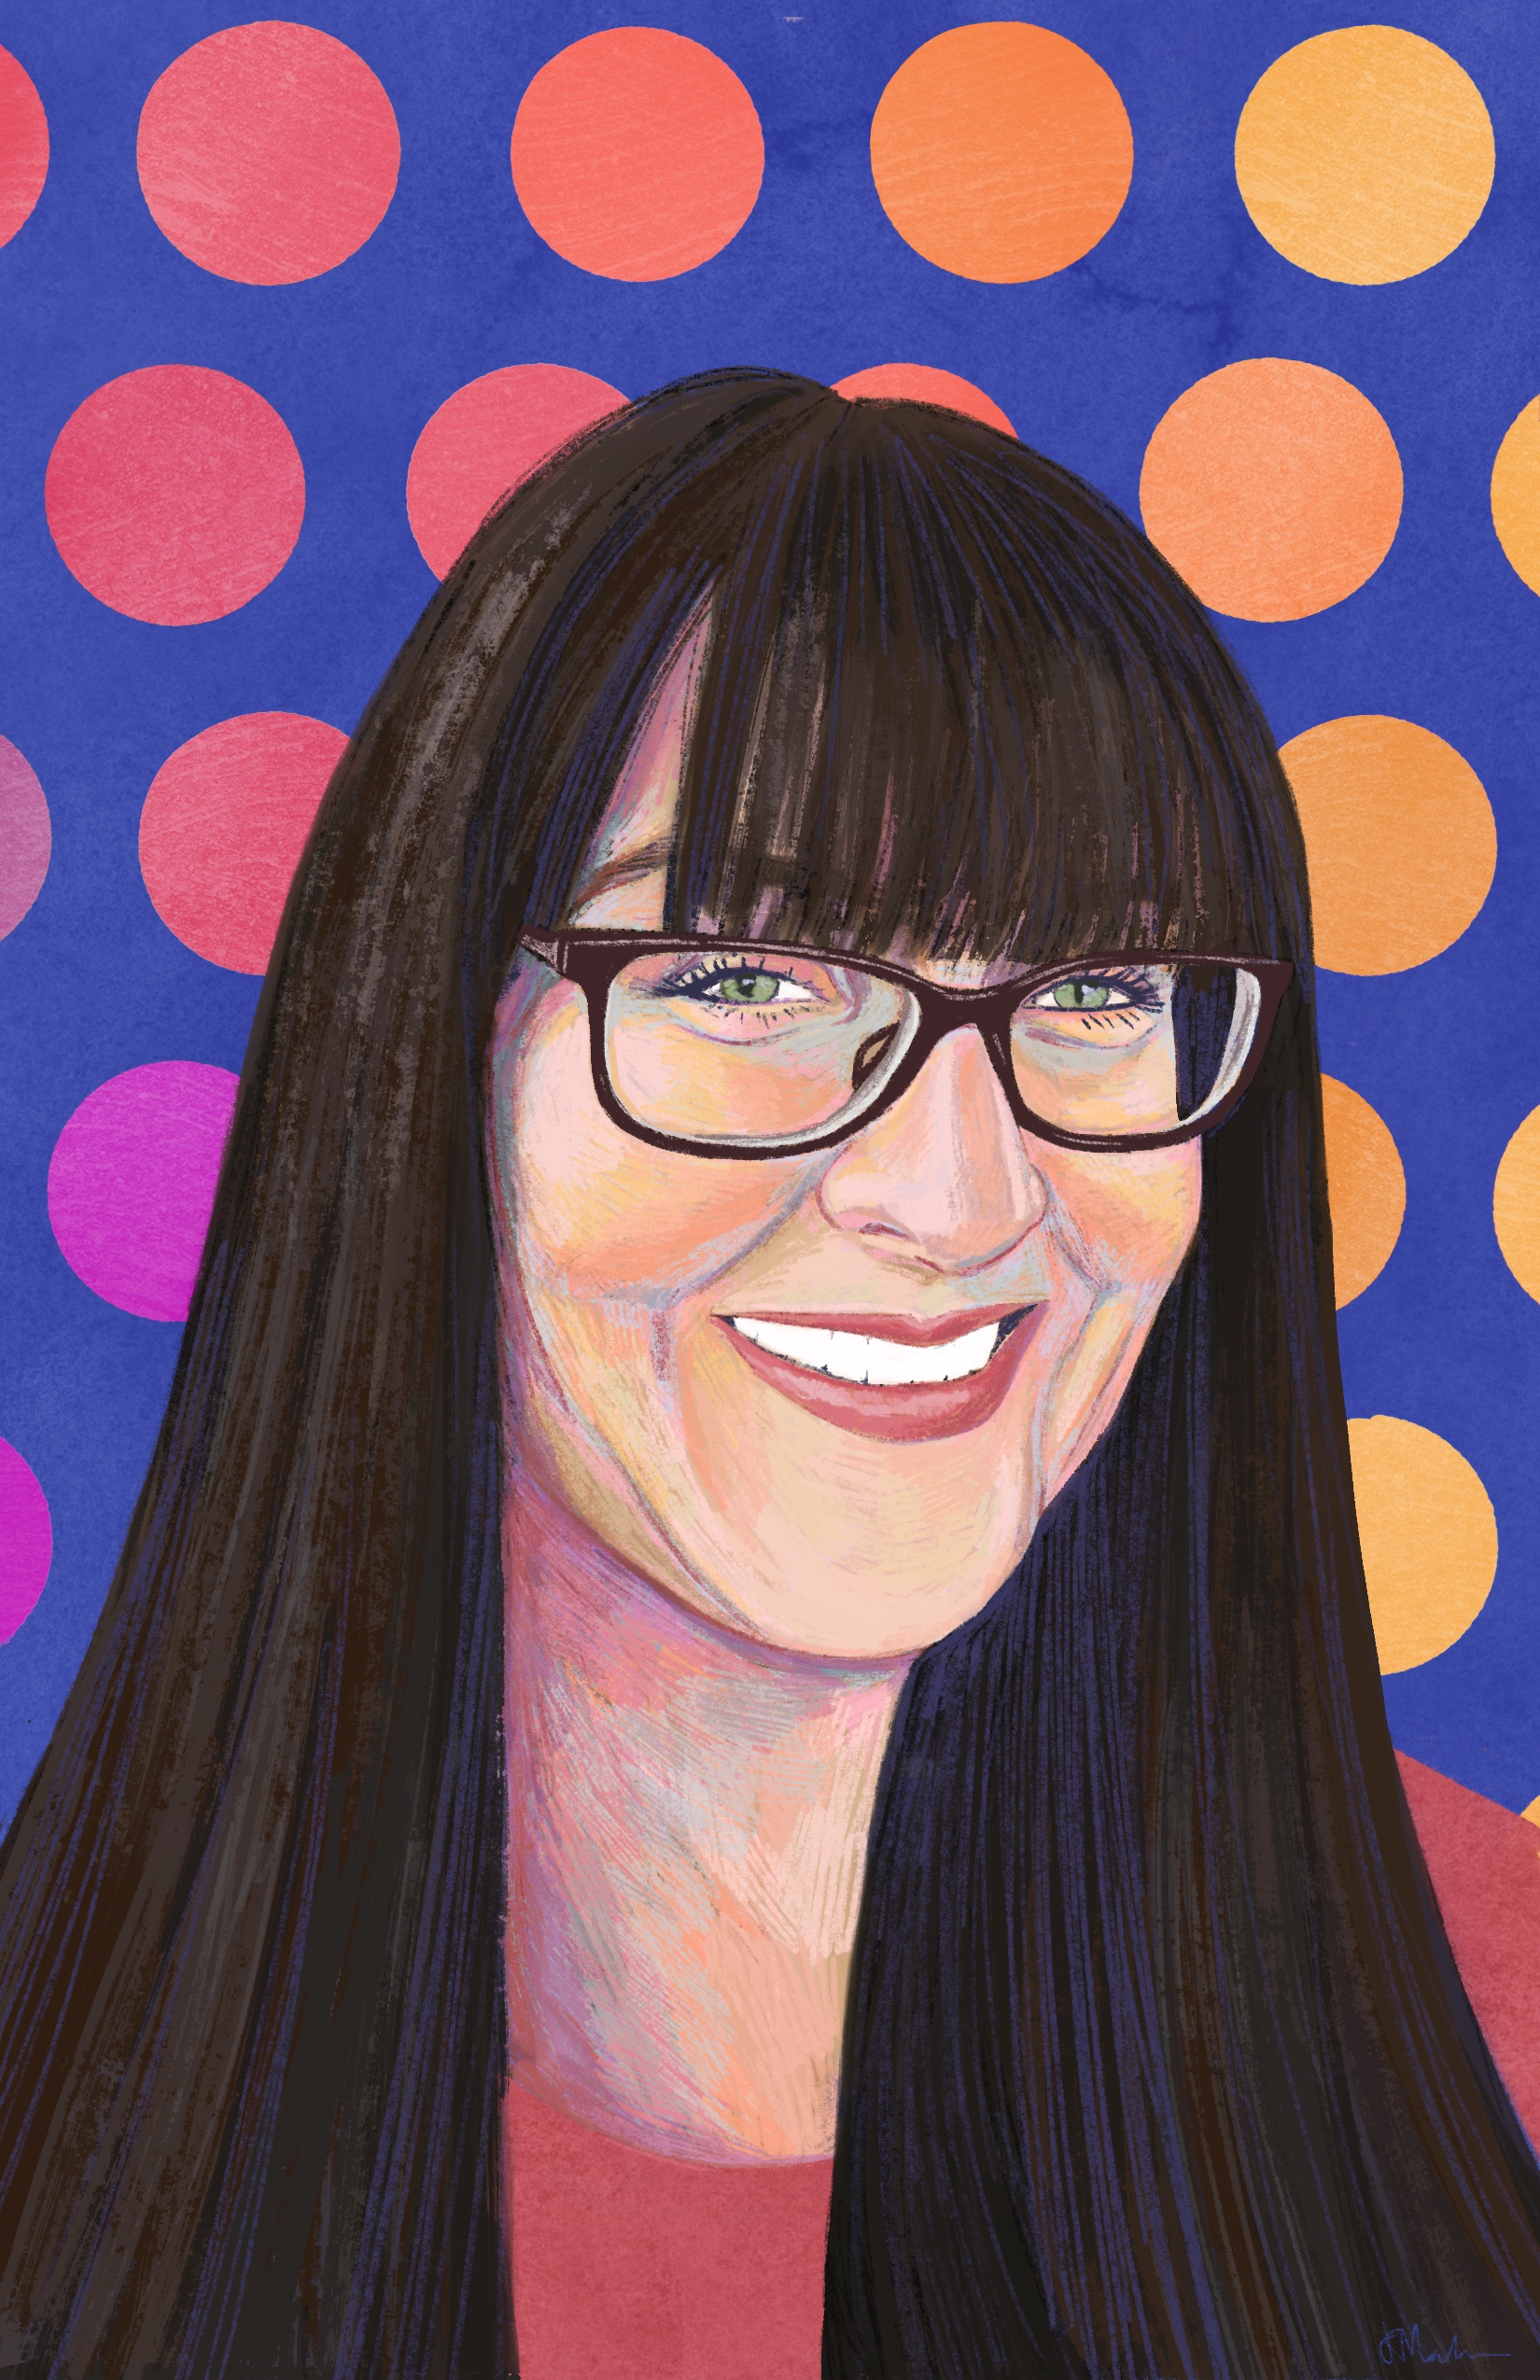 A digital painting of Bridgette. A smiling Caucasian woman with long dark brown hair, bangs and black glasses. She wears a coral coloured shirt. The background is a pink and orange polkadot pattern with purple underneath.